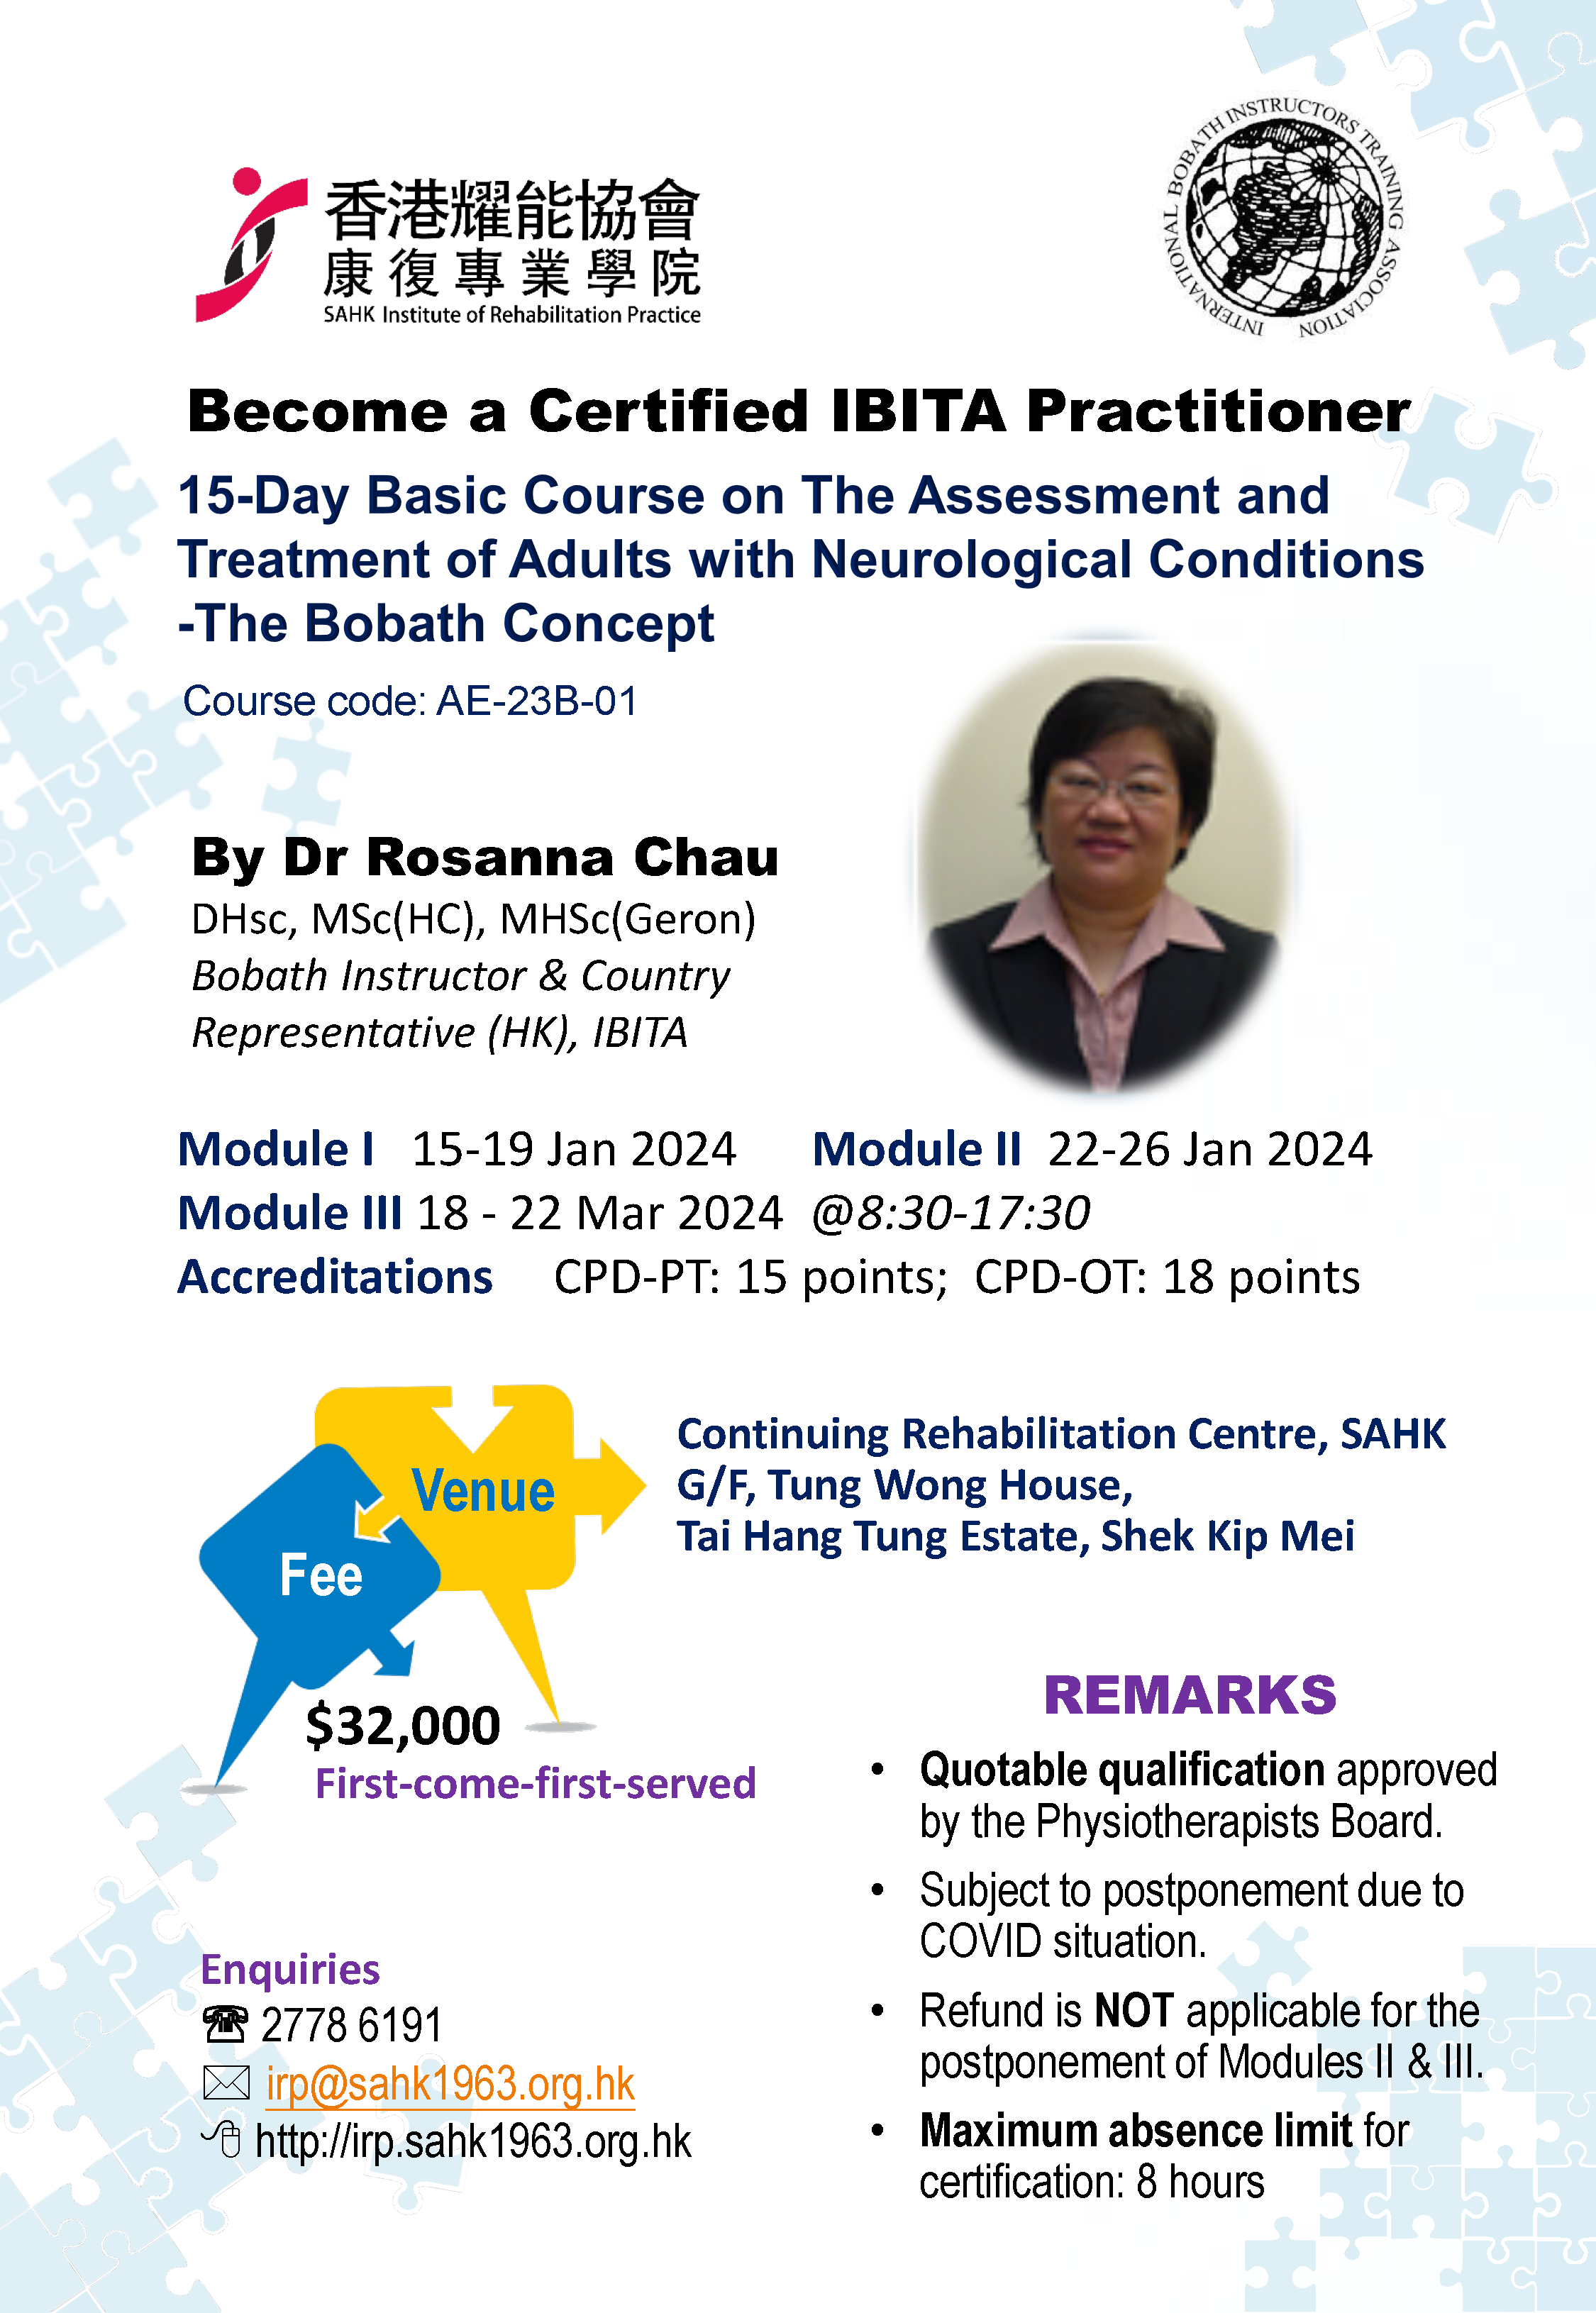 15-Day Basic Course on The Assessment and Treatment of Adults with Neurological Conditions -The Bobath Concept